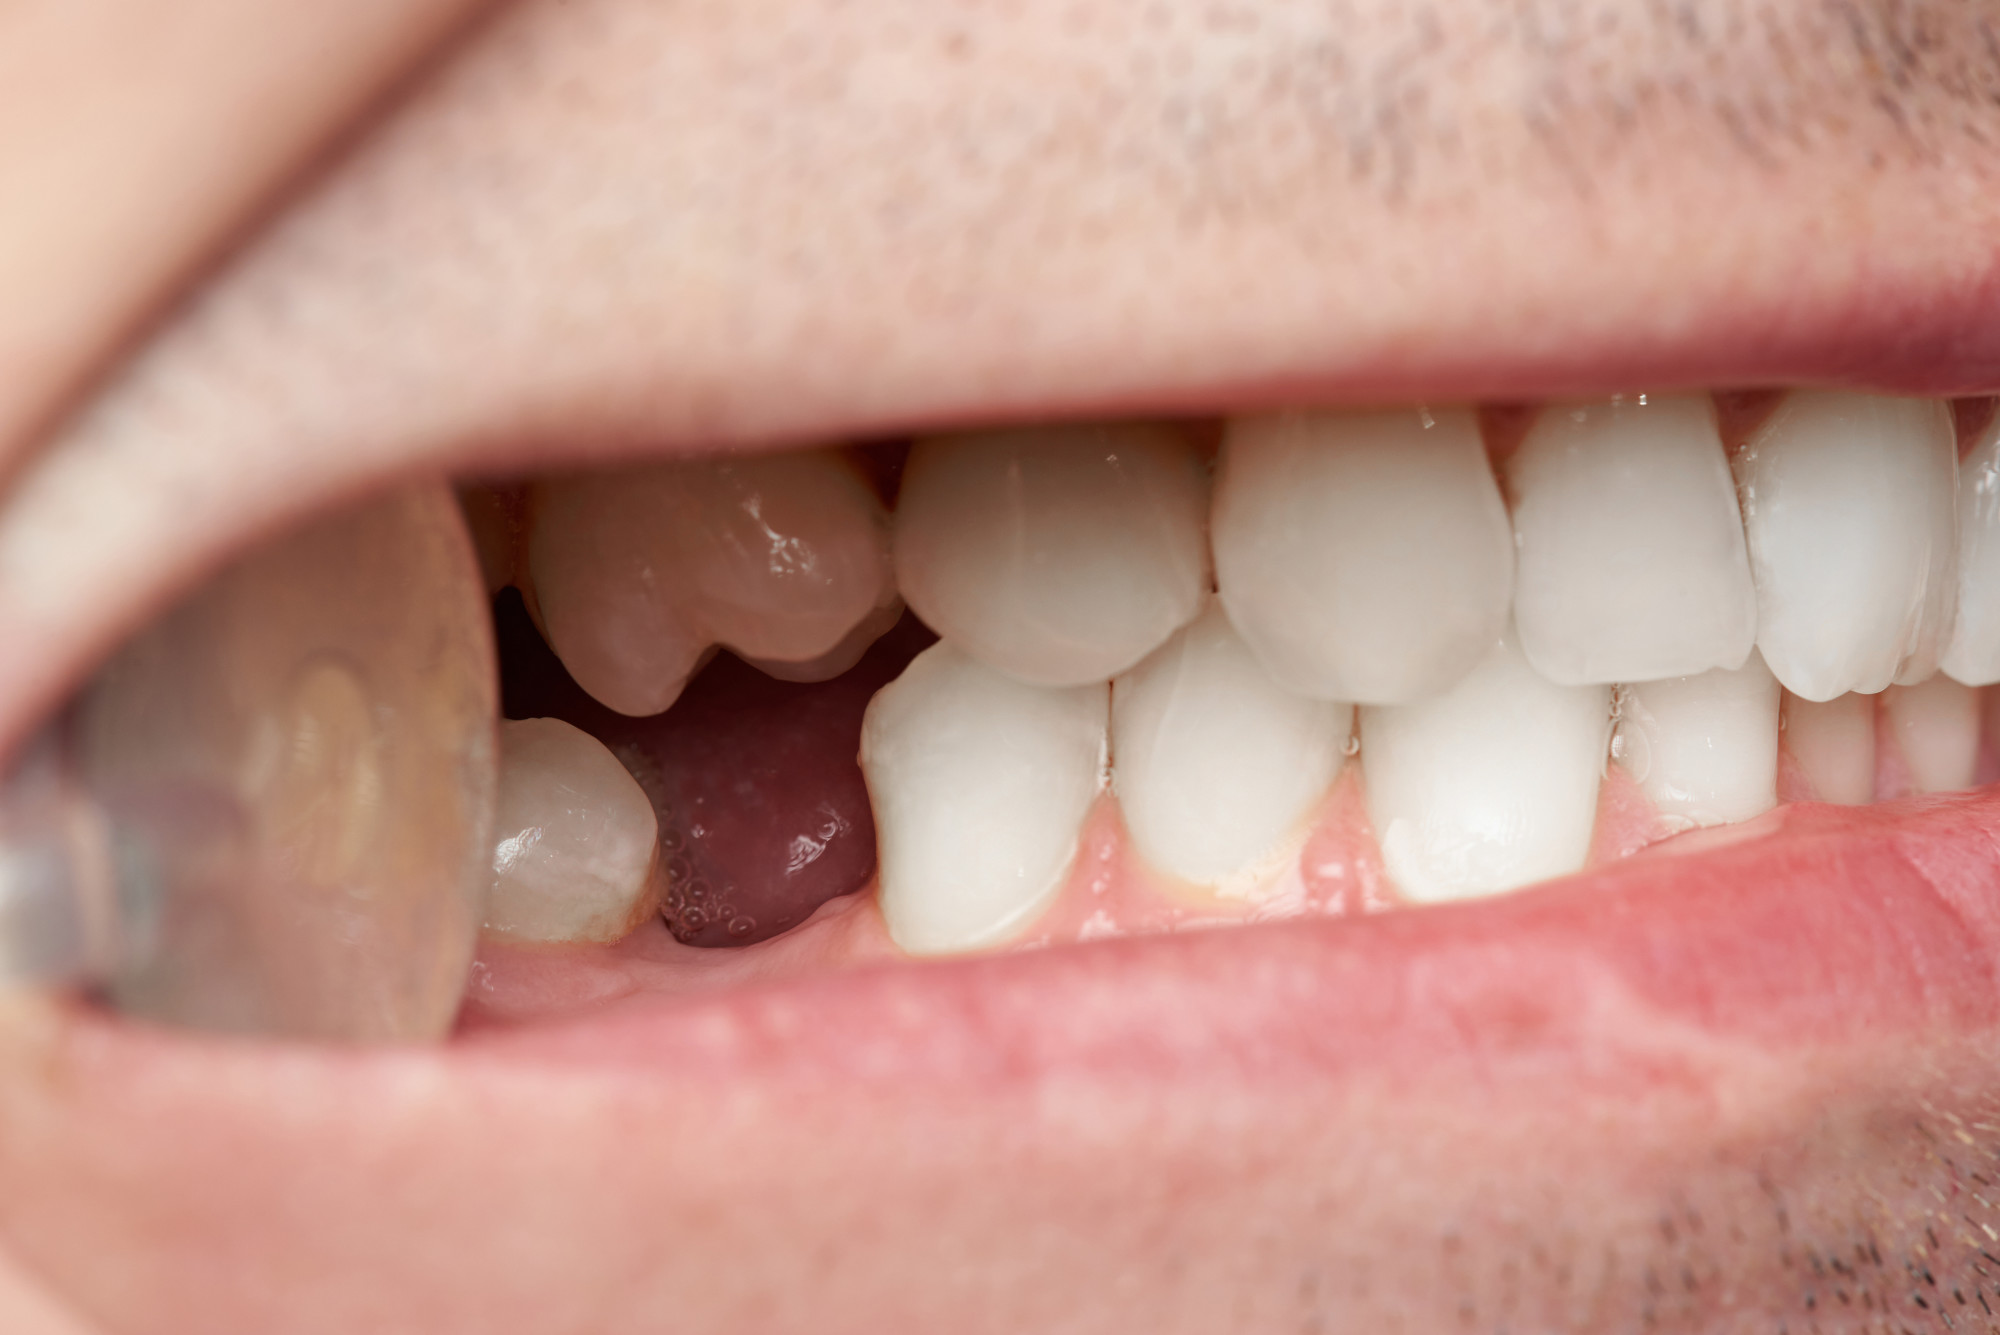 Accidents happen, and many adults lose teeth at some time or another due to a sports injury or mouth trauma. Here is what to do if you suddenly lose a tooth.